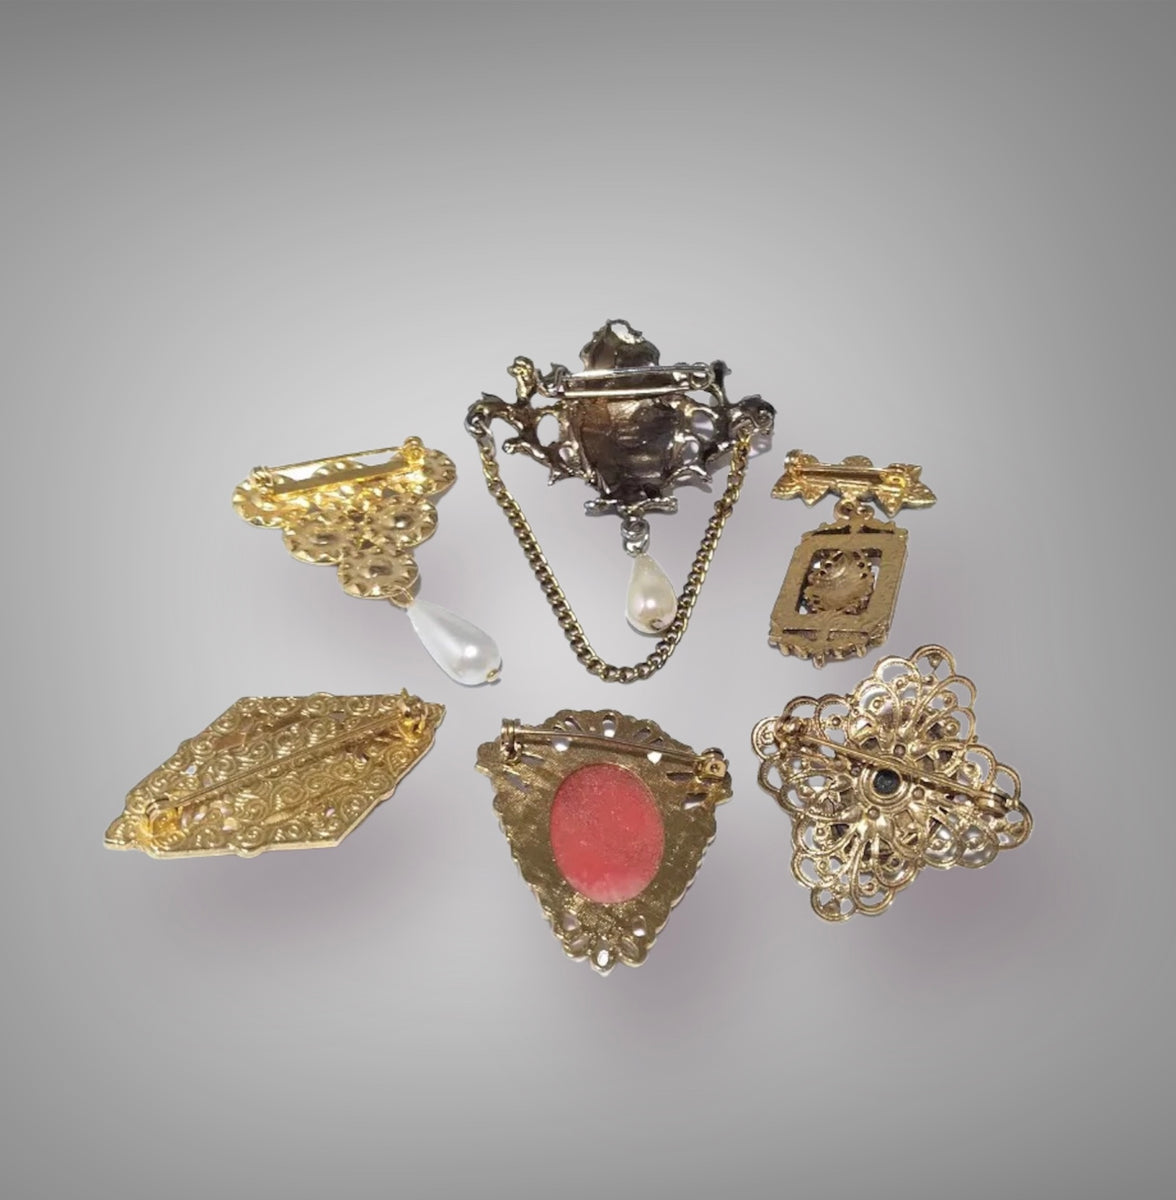 Brooches & Pins Oh My! – 1928 Jewelry